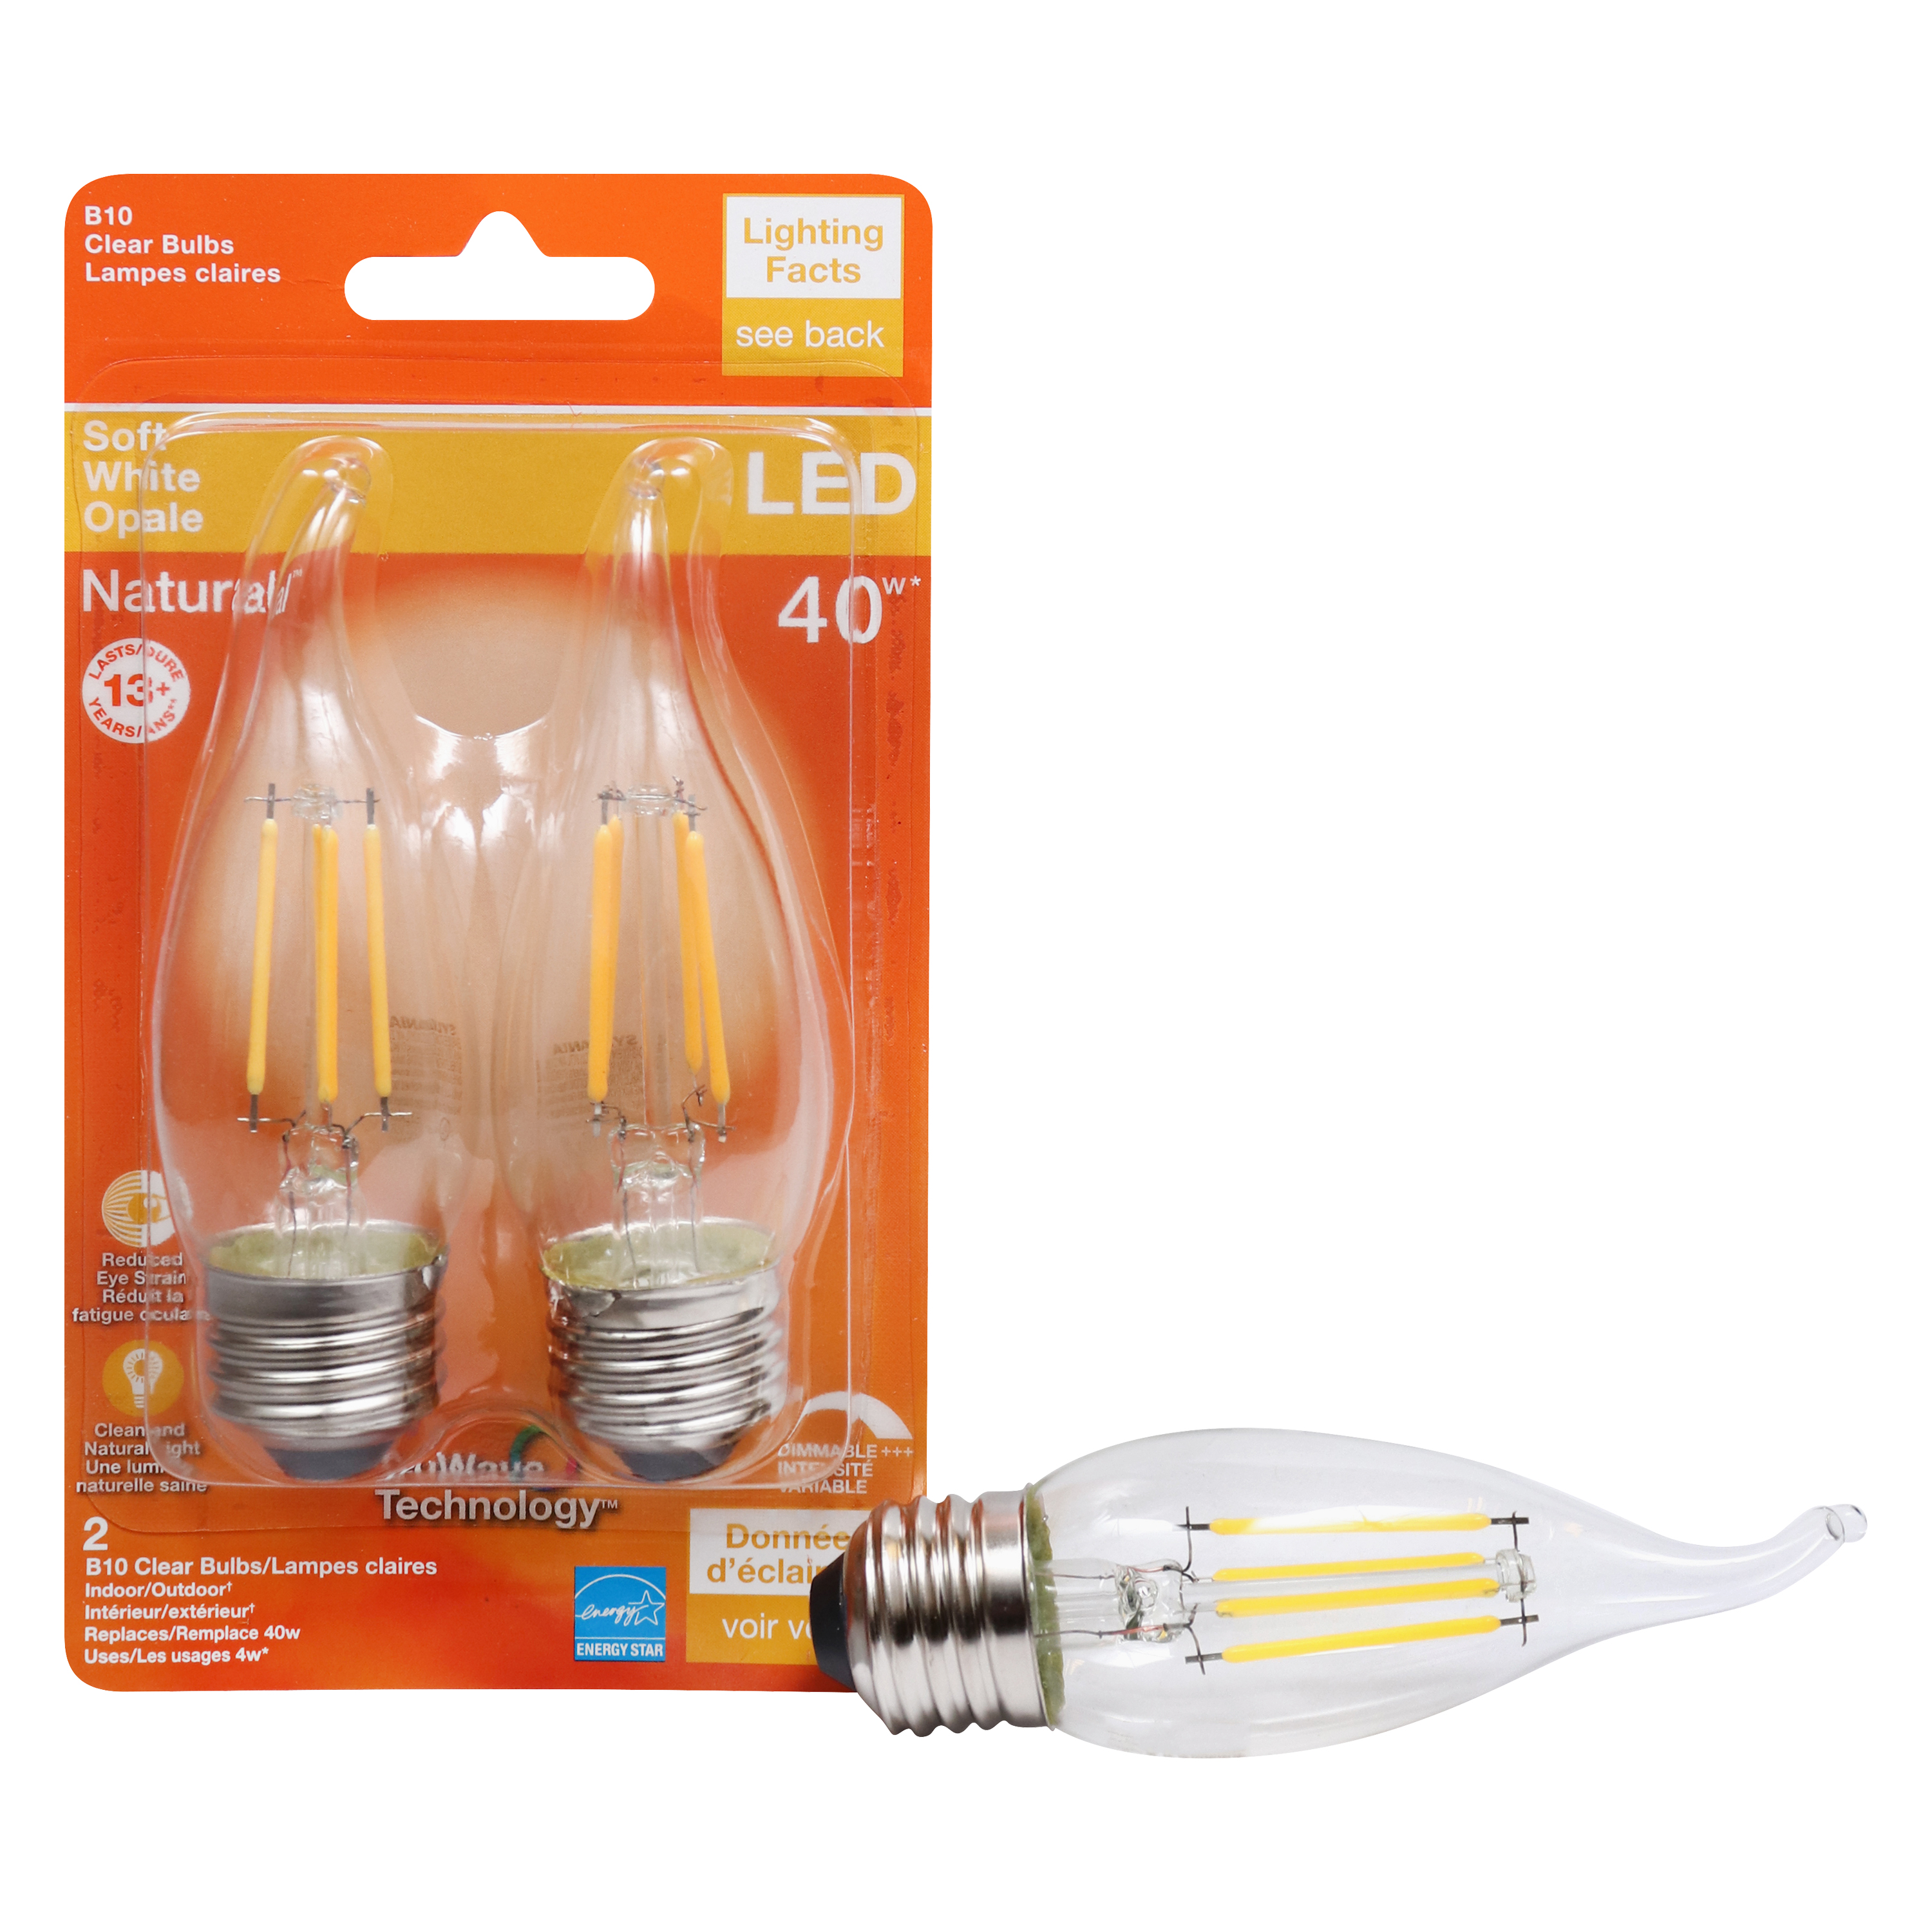 Sylvania 40756 Natural LED Bulb, Decorative, B10 Bent Tip Lamp, 40 W Equivalent, E26 Lamp Base, Dimmable, Clear